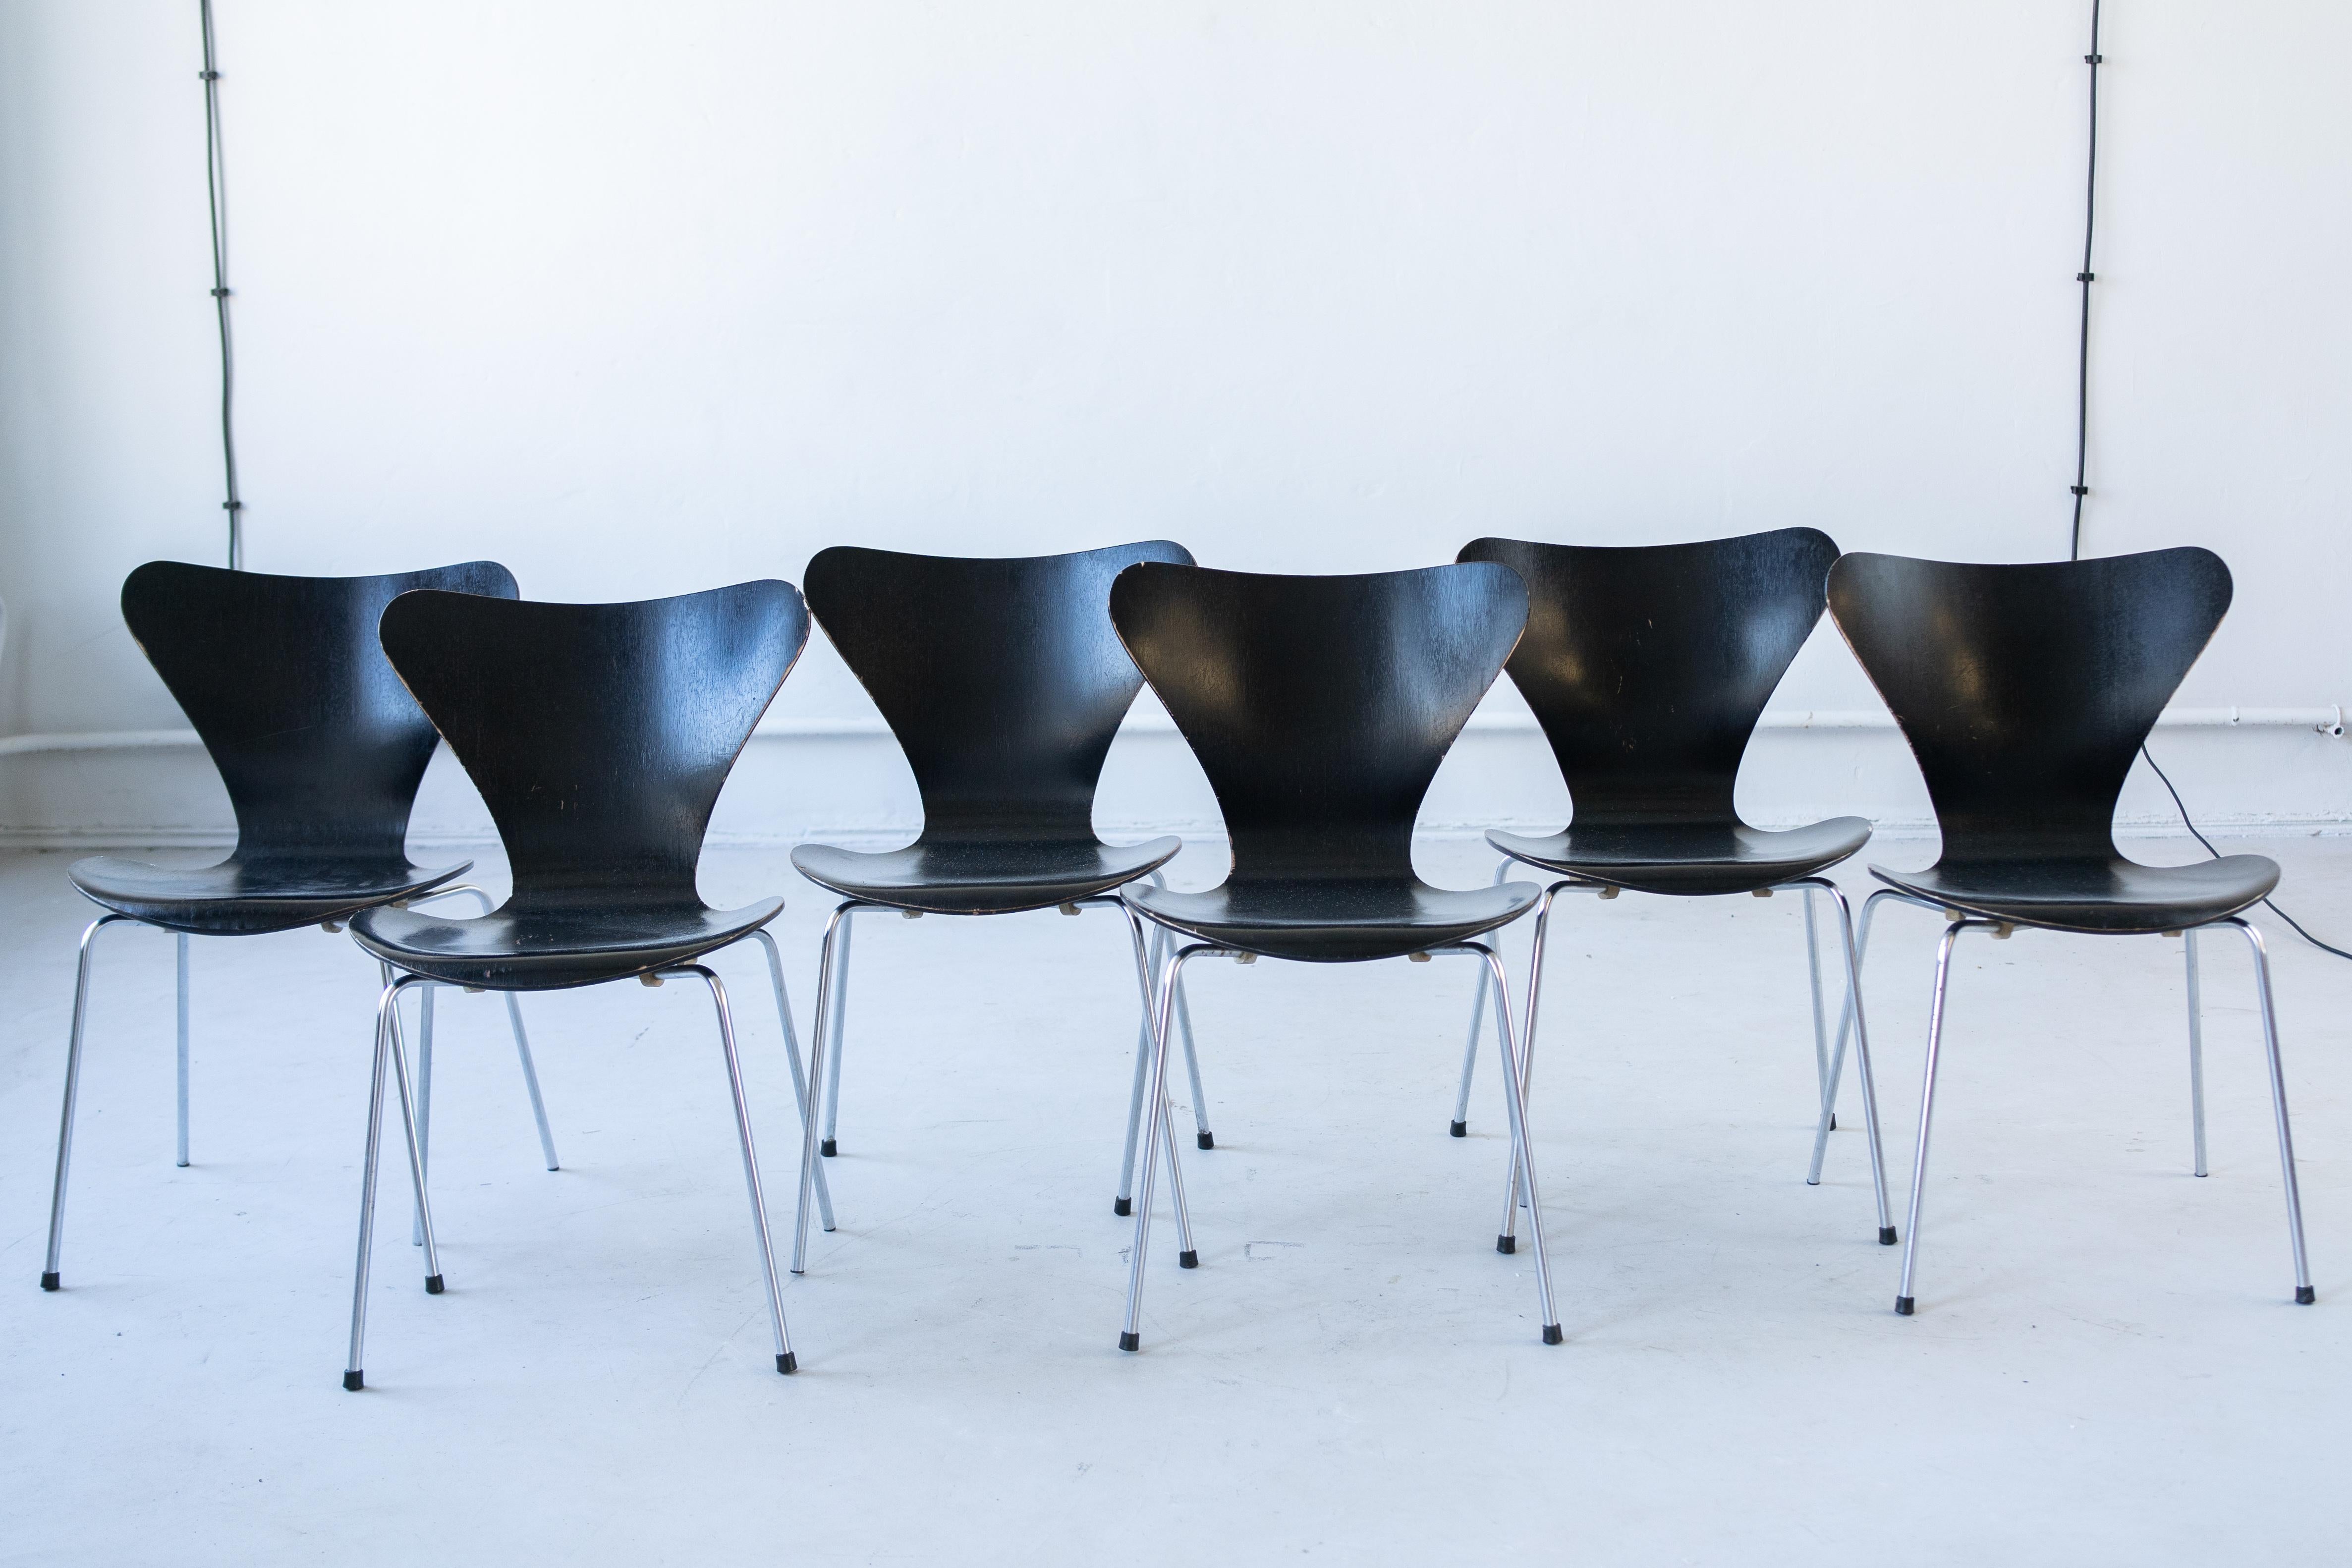 Danish chairs series 7  designed by Erne Jacobsen in 1955 , produced by Fritz Hansen, 
Very versatile, clean lines,.
 Thanks to the special tecnique used by the producer this chair is very flexible, strong and durable. 
Easy to storage.
We offer a